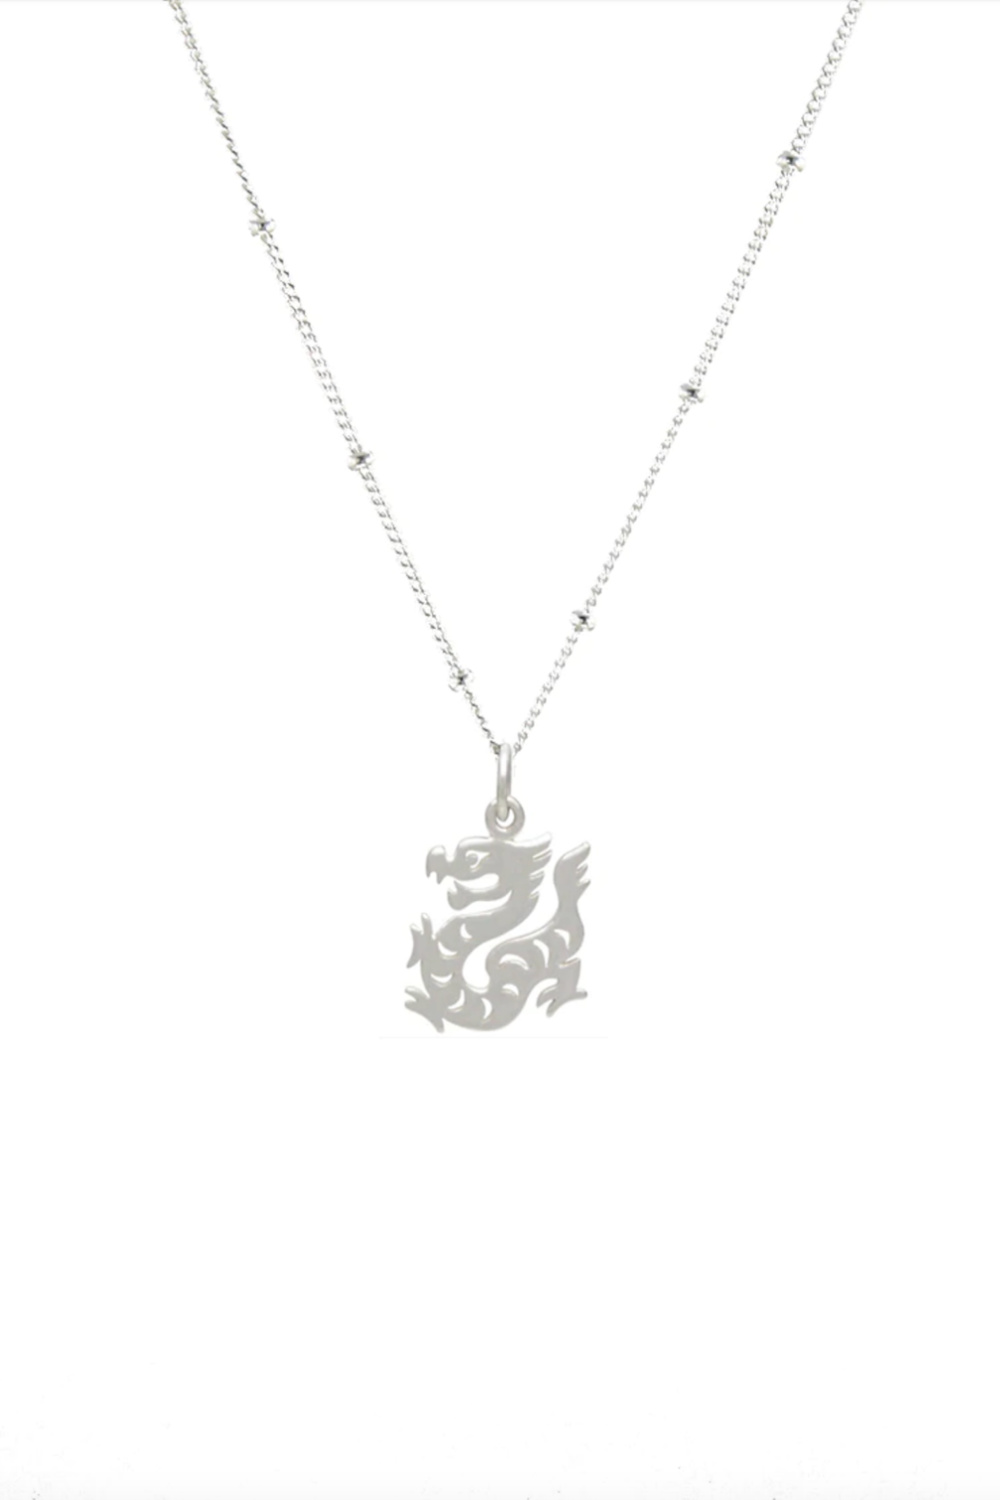 Year of the Dragon necklace by Peggy Li | 100% of the proceeds donated to Stop AAPI Hate